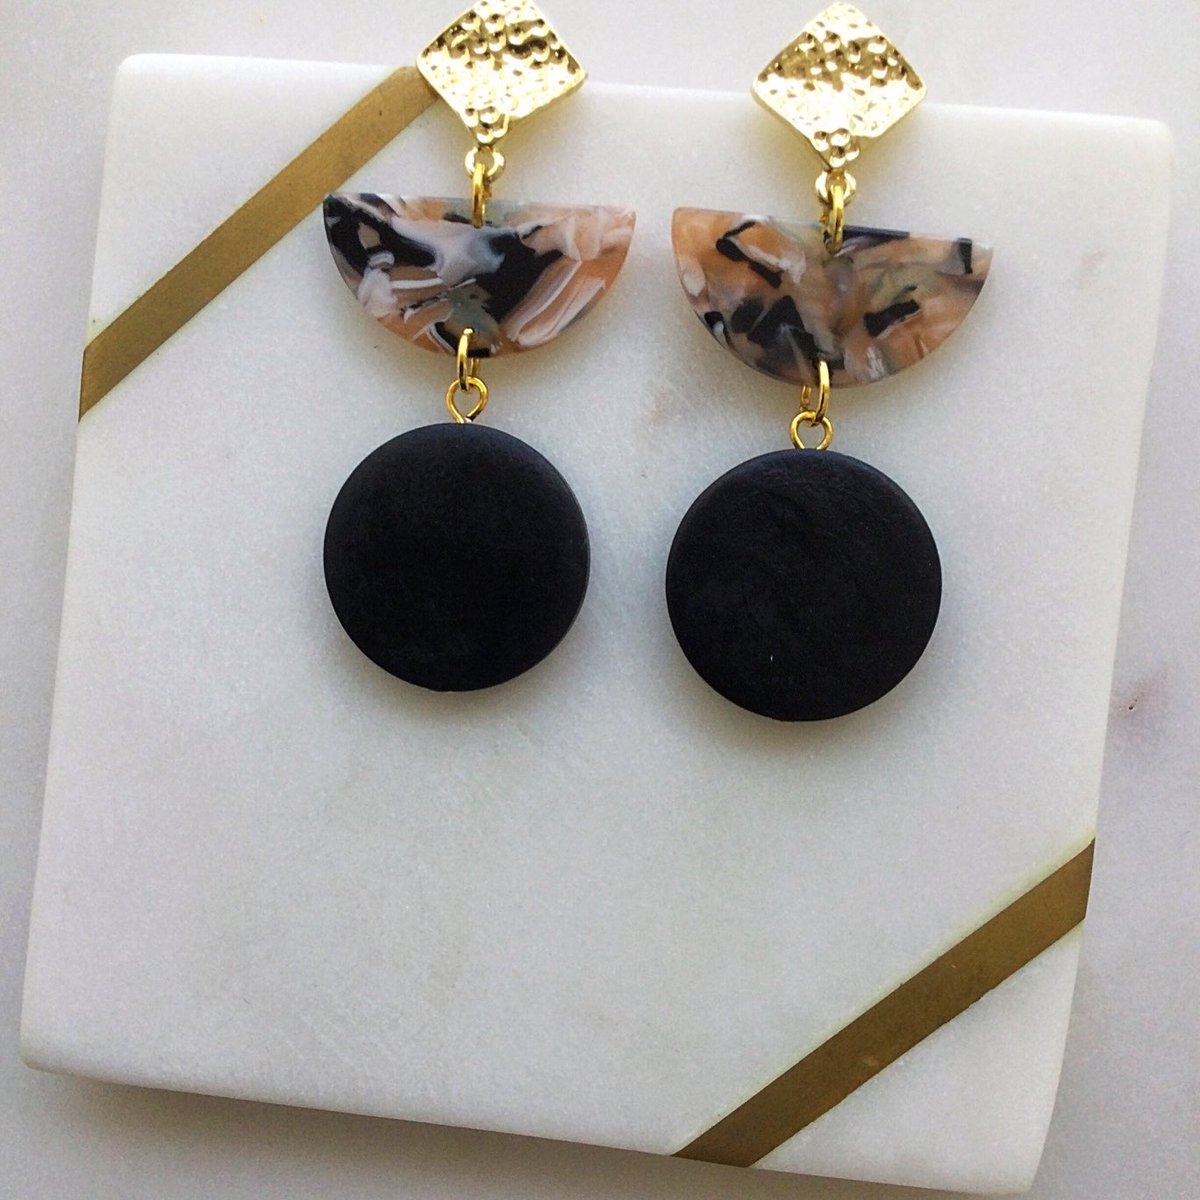 handmadebyjanelle1.etsy.com/listing/901017… 20% SALE Shop for all your Xmas presents #earrings #handmade #etsy #etsyshop #sale uniqueearrings #gifts #giftsforher #woodearrings #blackearrings #style #fashion #fashionearrings